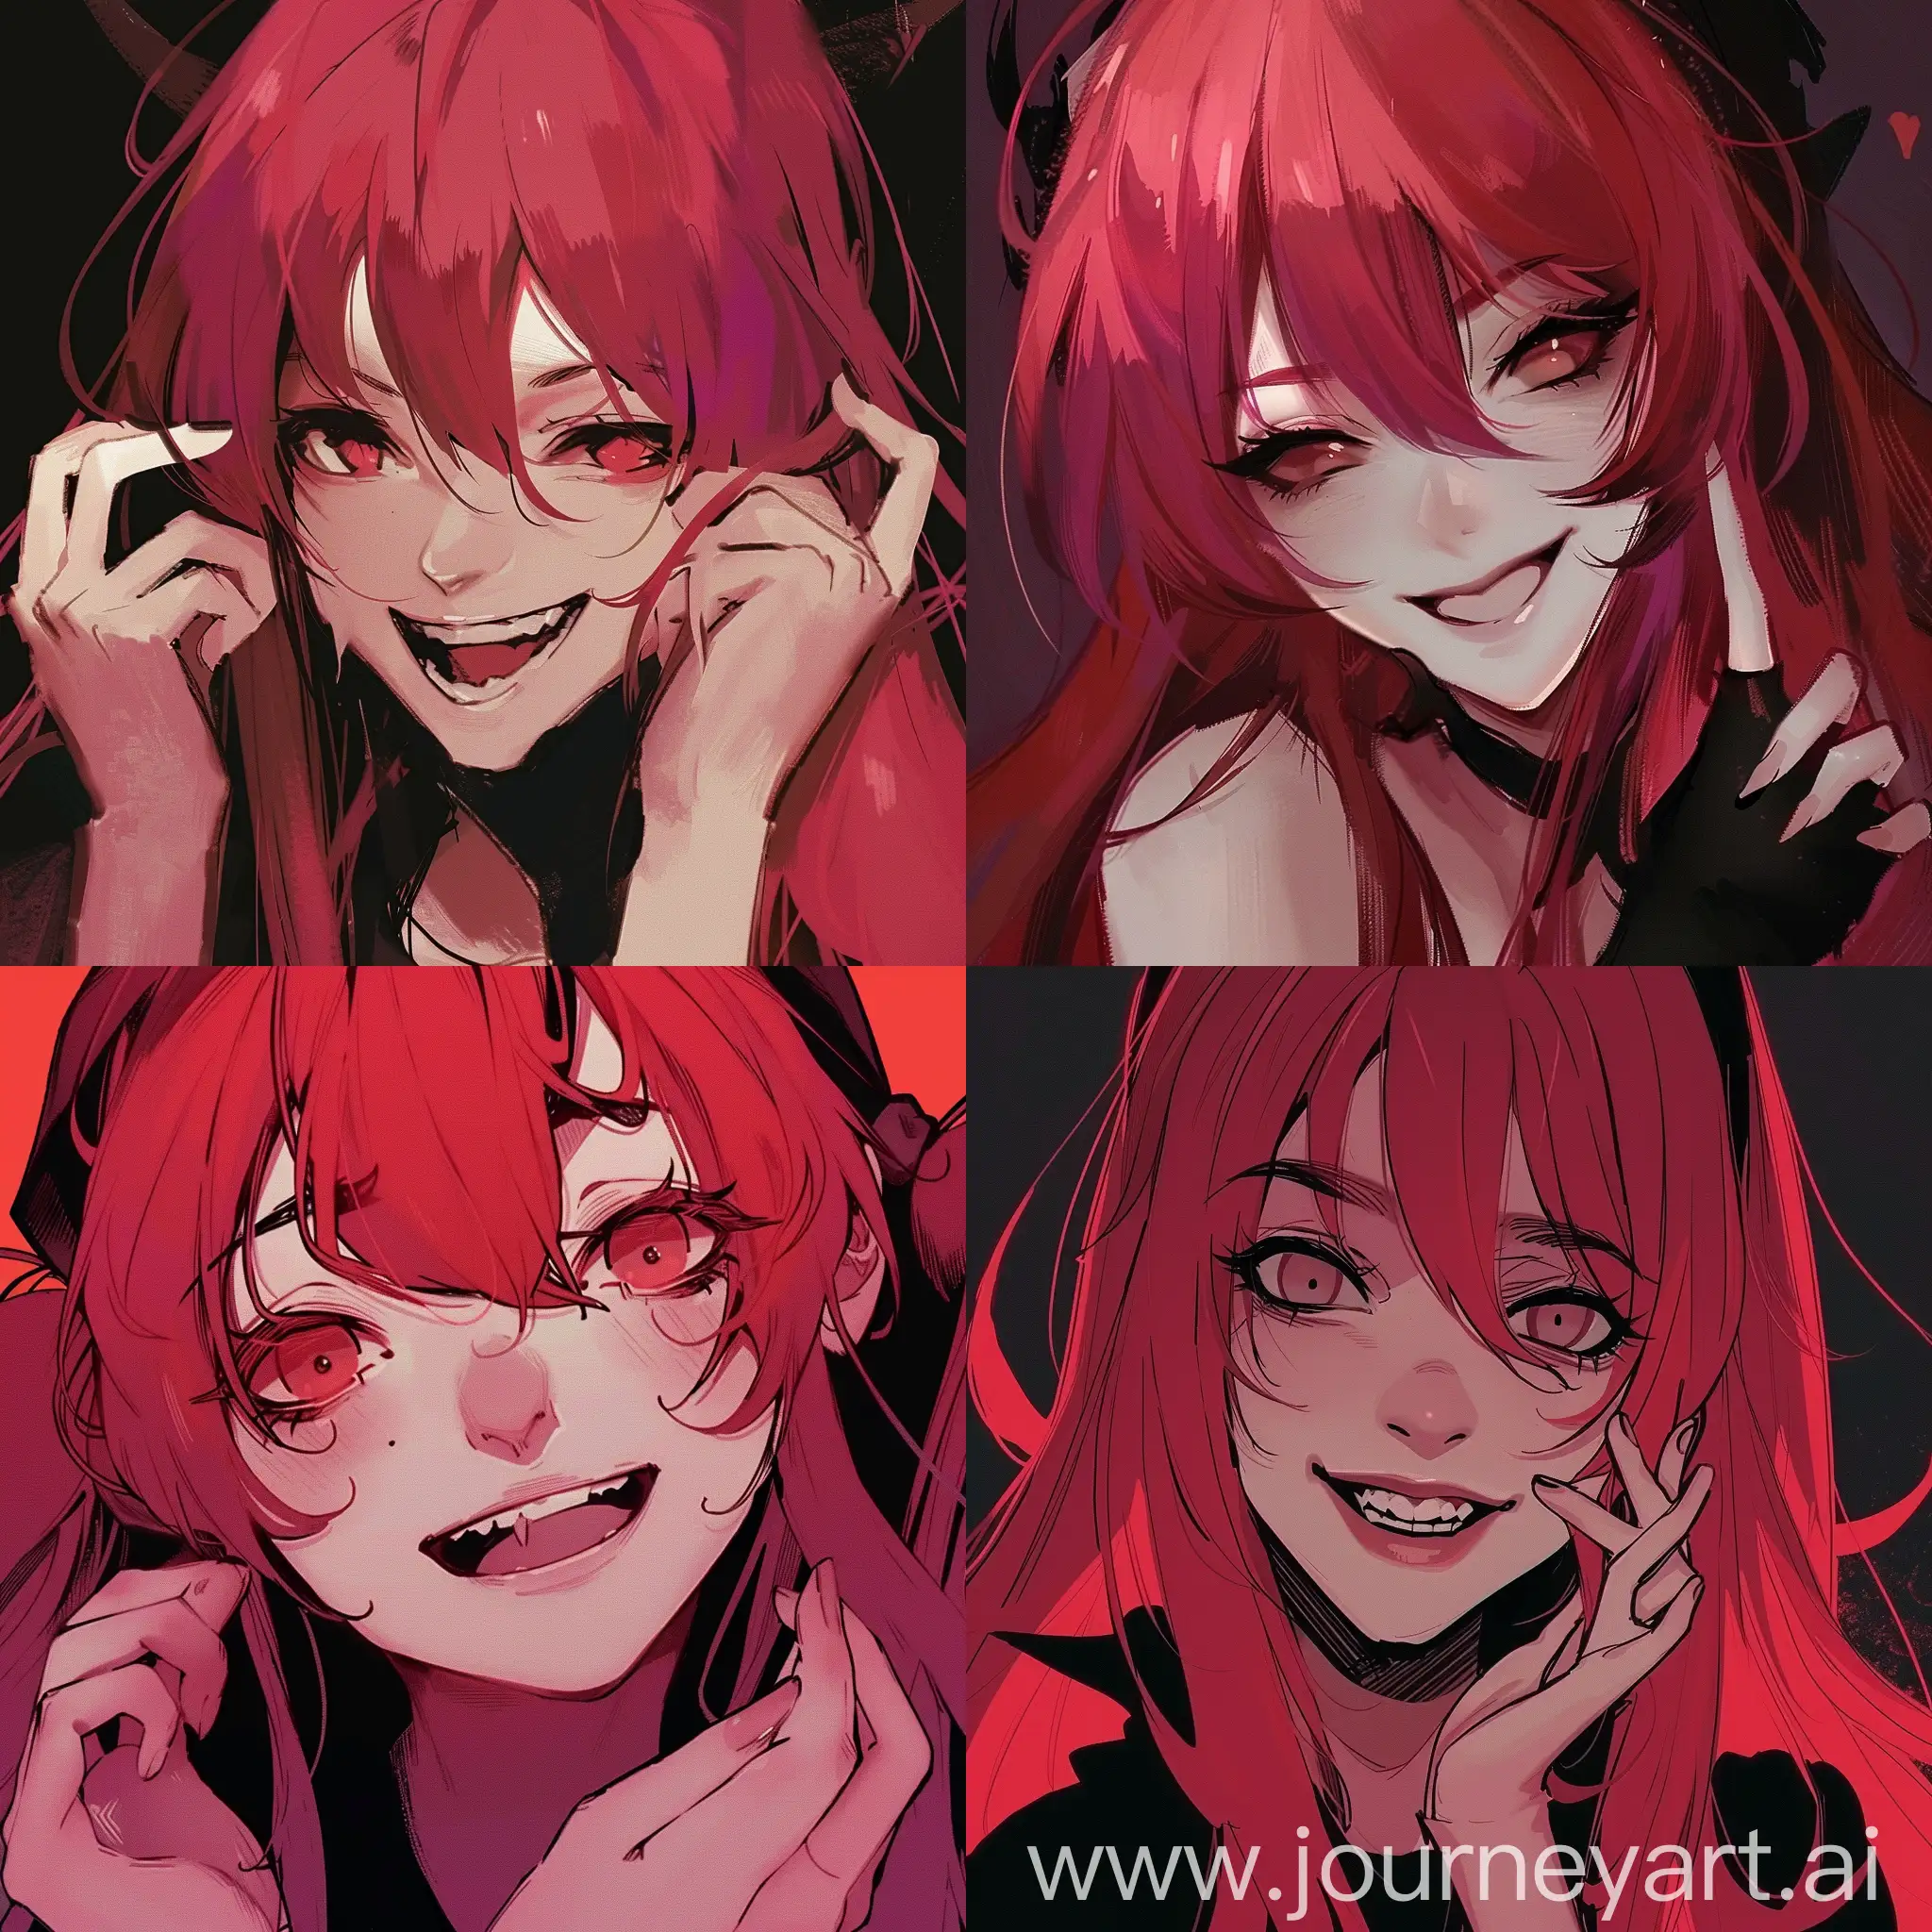 Red-Hair-Girl-with-a-Satanic-Smile-and-Normal-Features